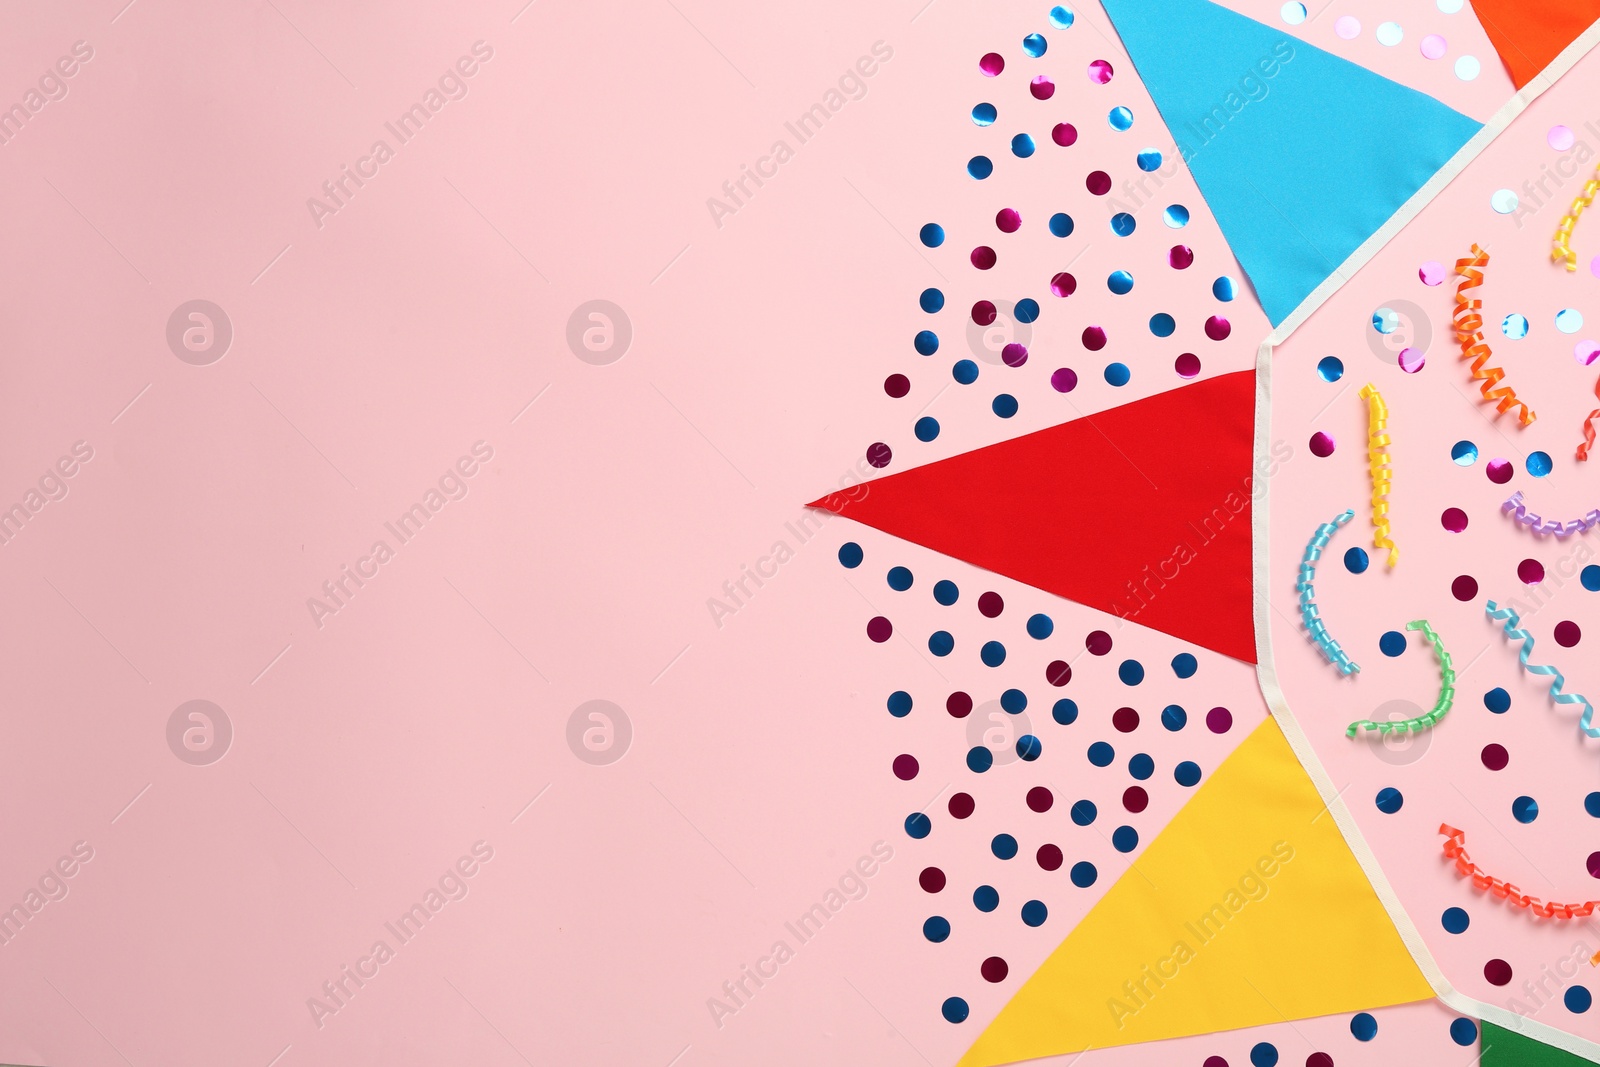 Photo of Bunting with colorful triangular flags and other festive decor on pink background, flat lay. Space for text